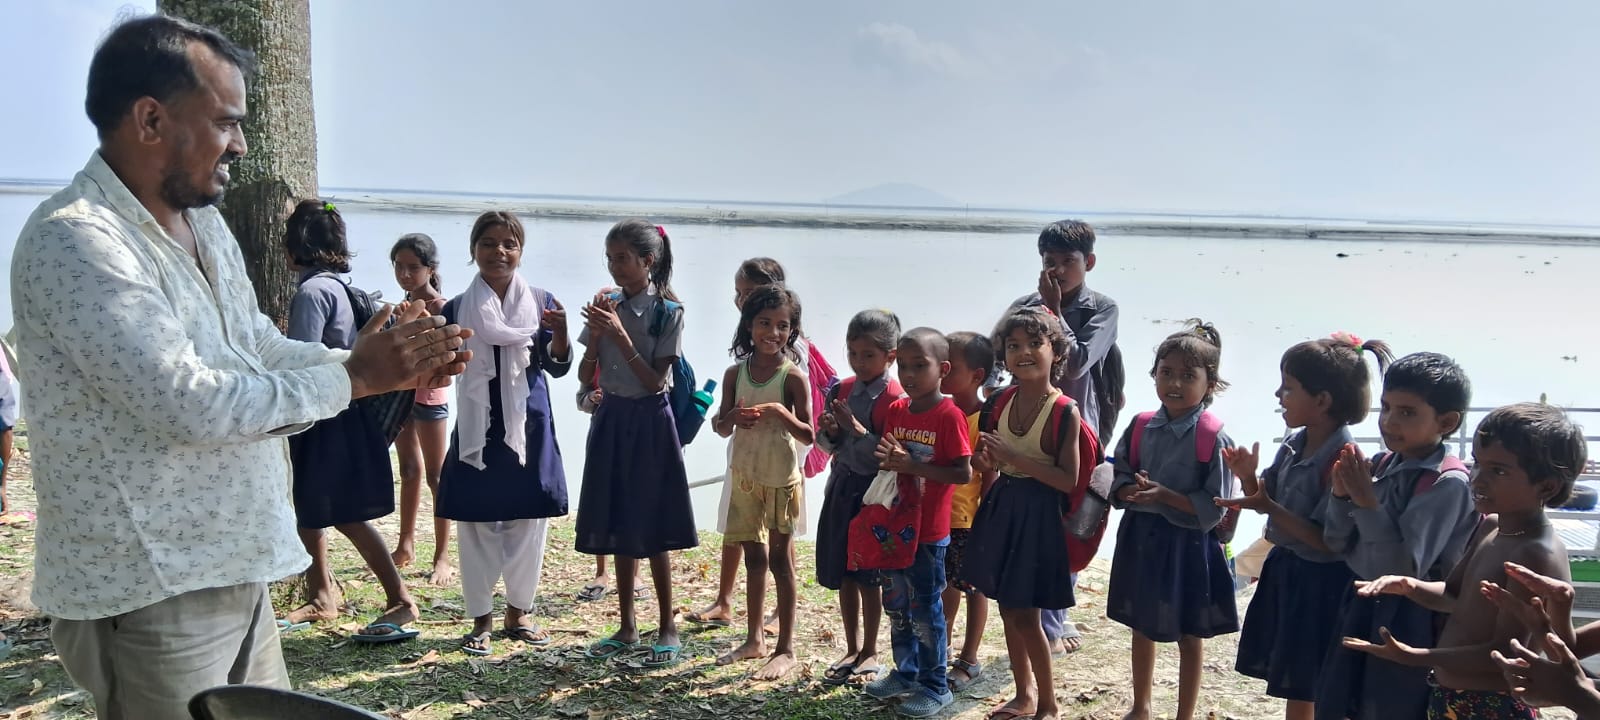 NDD deworming tablets being given to children under 19 at Mohanpur village organized by Boat Clinic Bongaigaon